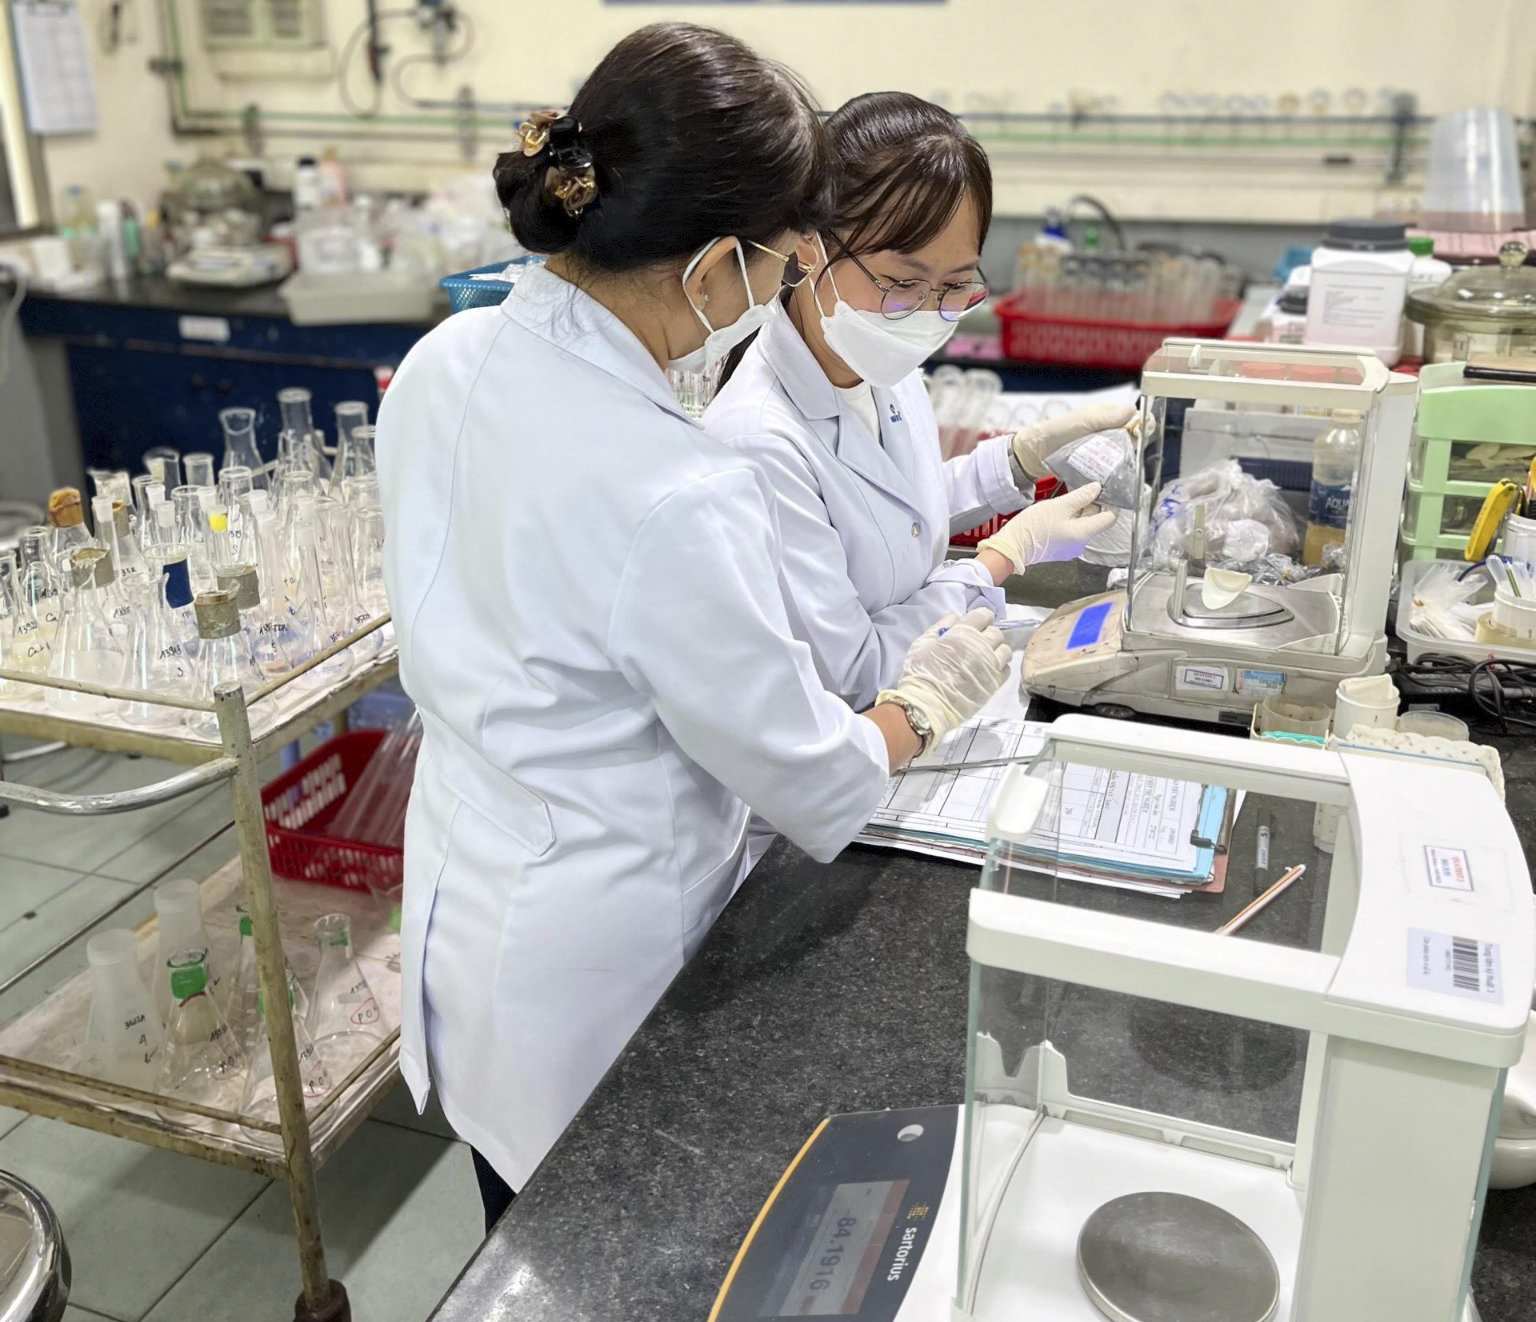 Scheme for digital transformation in the quality assurance and testing sector in Vietnam until 2025, with a vision towards 2030